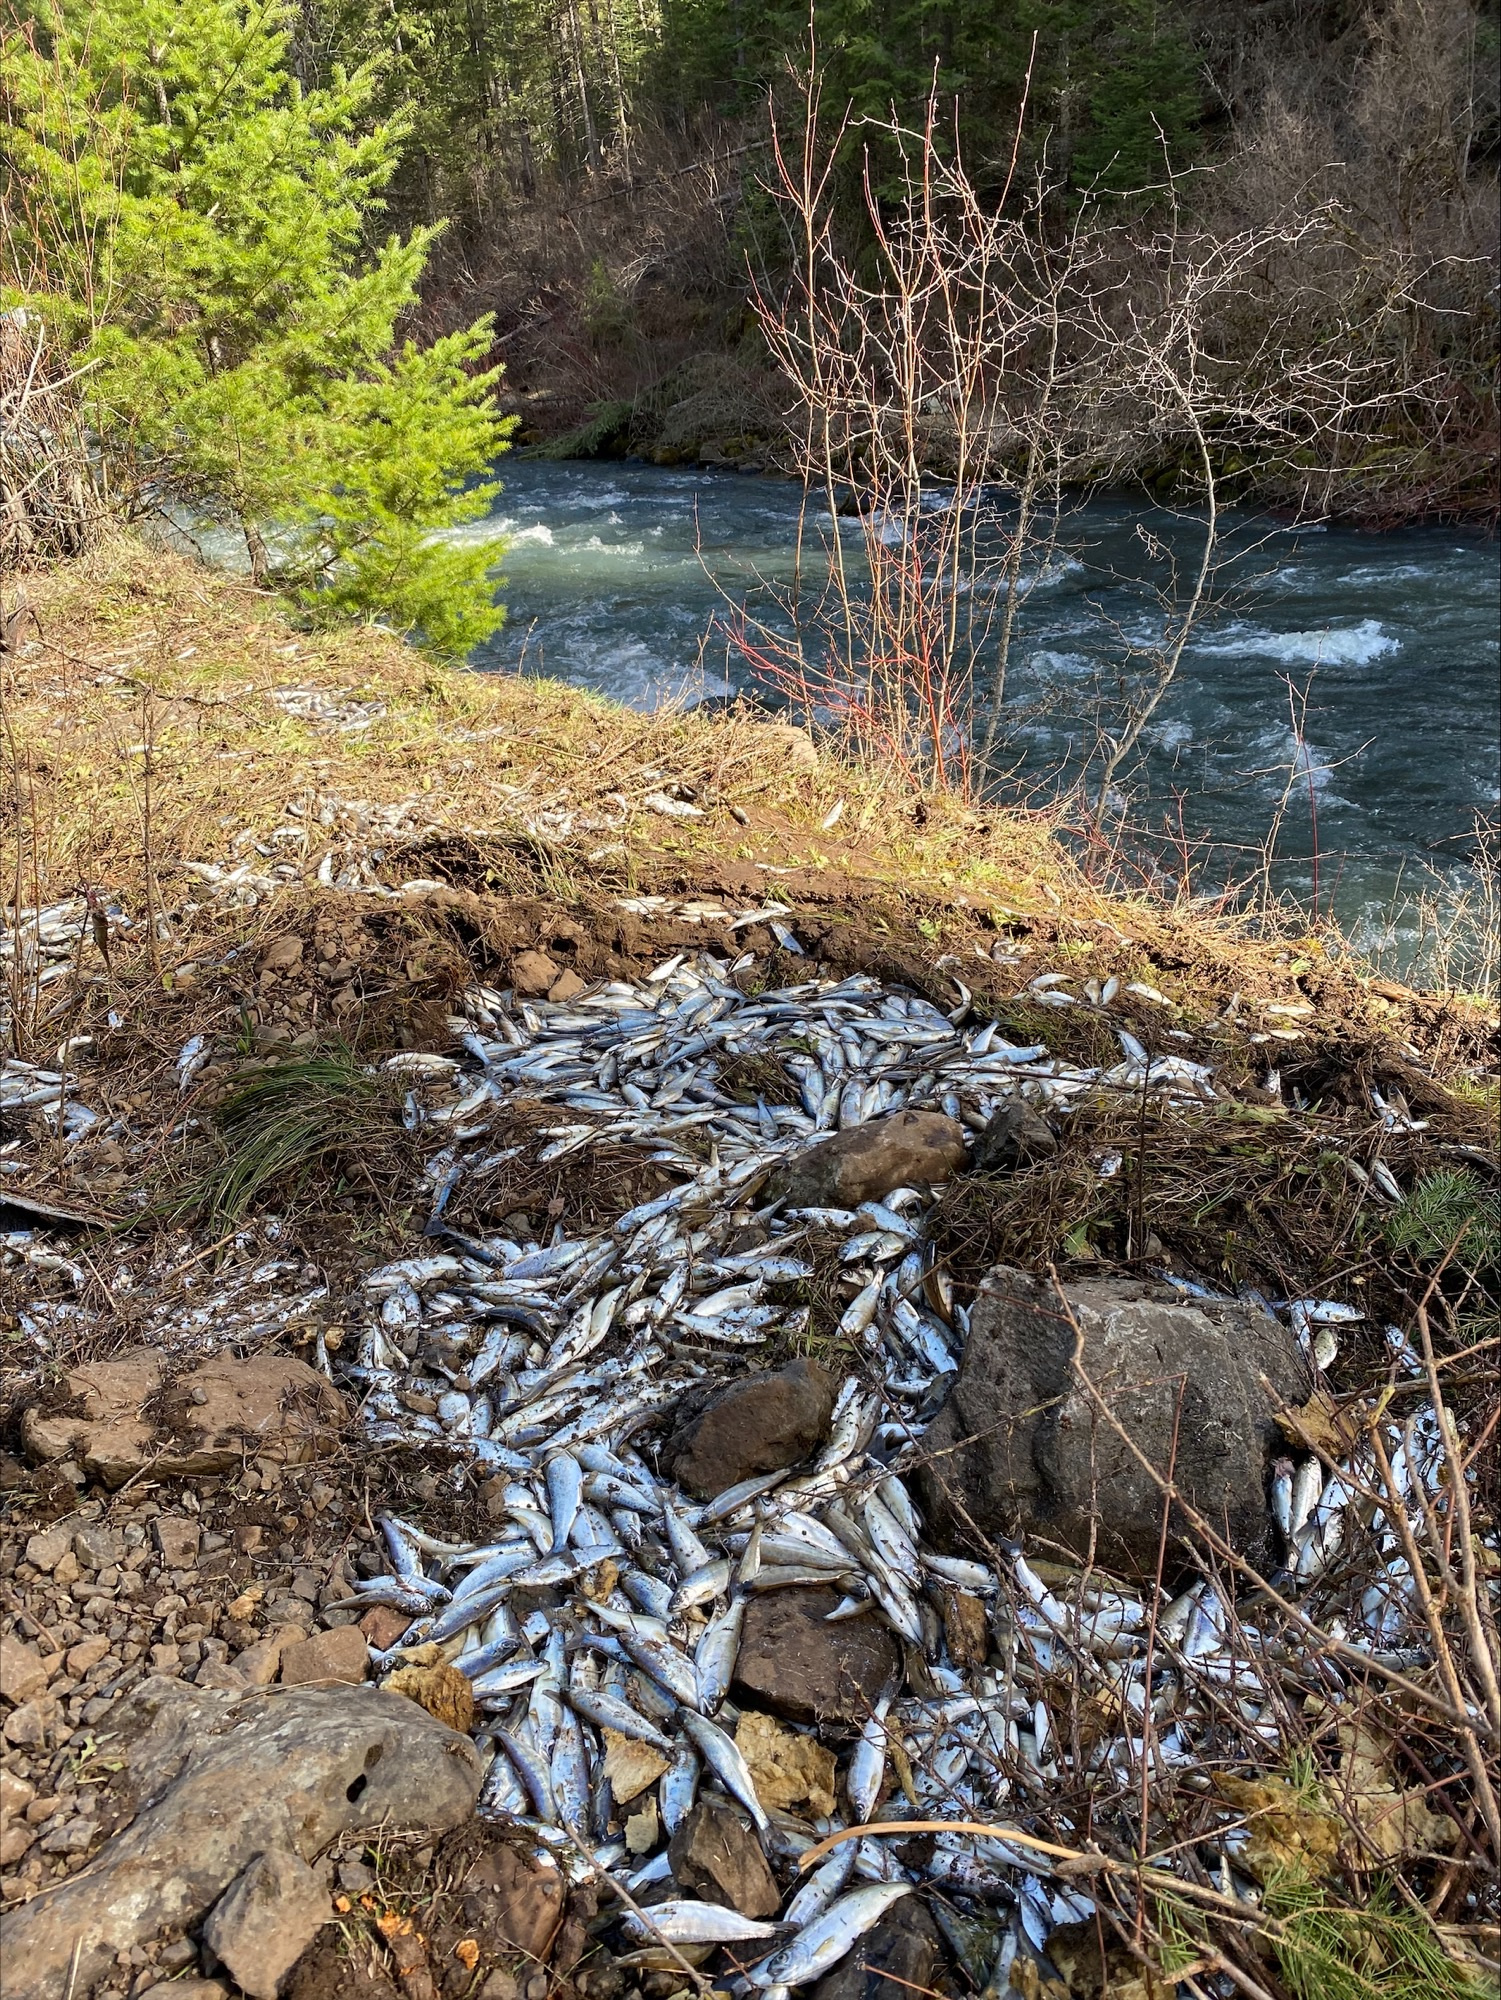 A pile of dead salmon smolts lays on a riverbank.